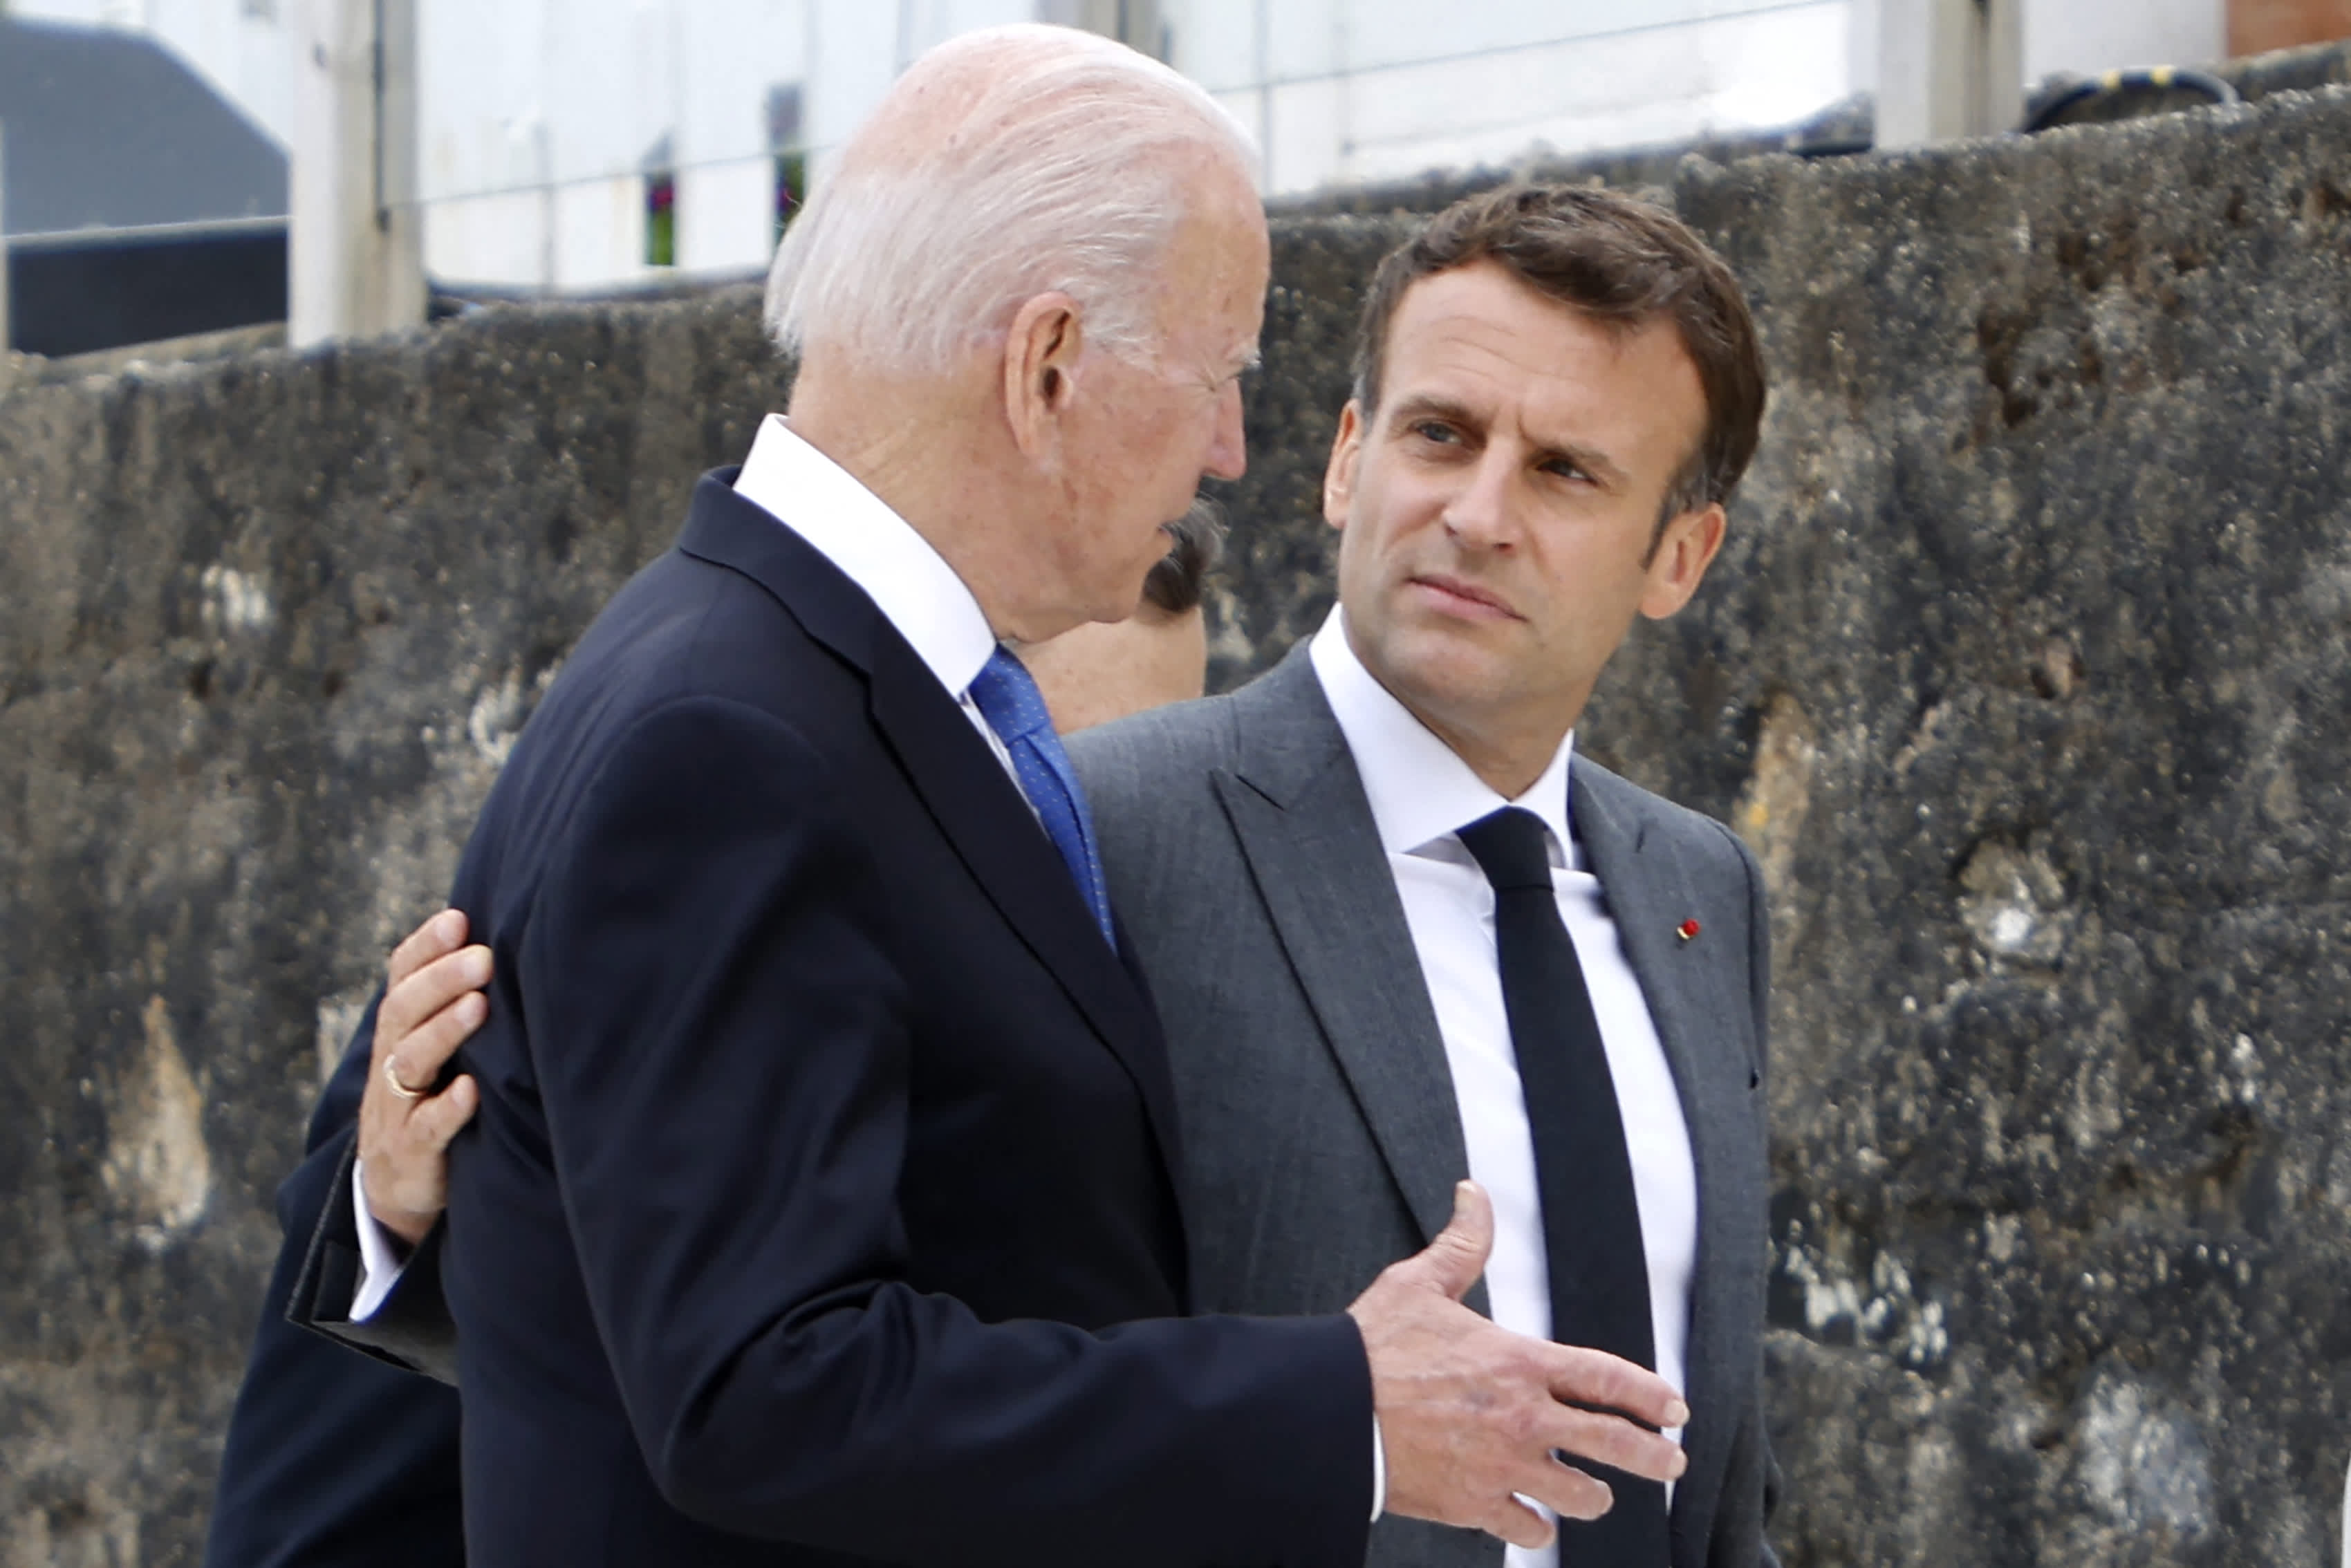 Biden and Macron to meet in Europe; France will return ambassador to U.S. after dispute over submarine deal – CNBC